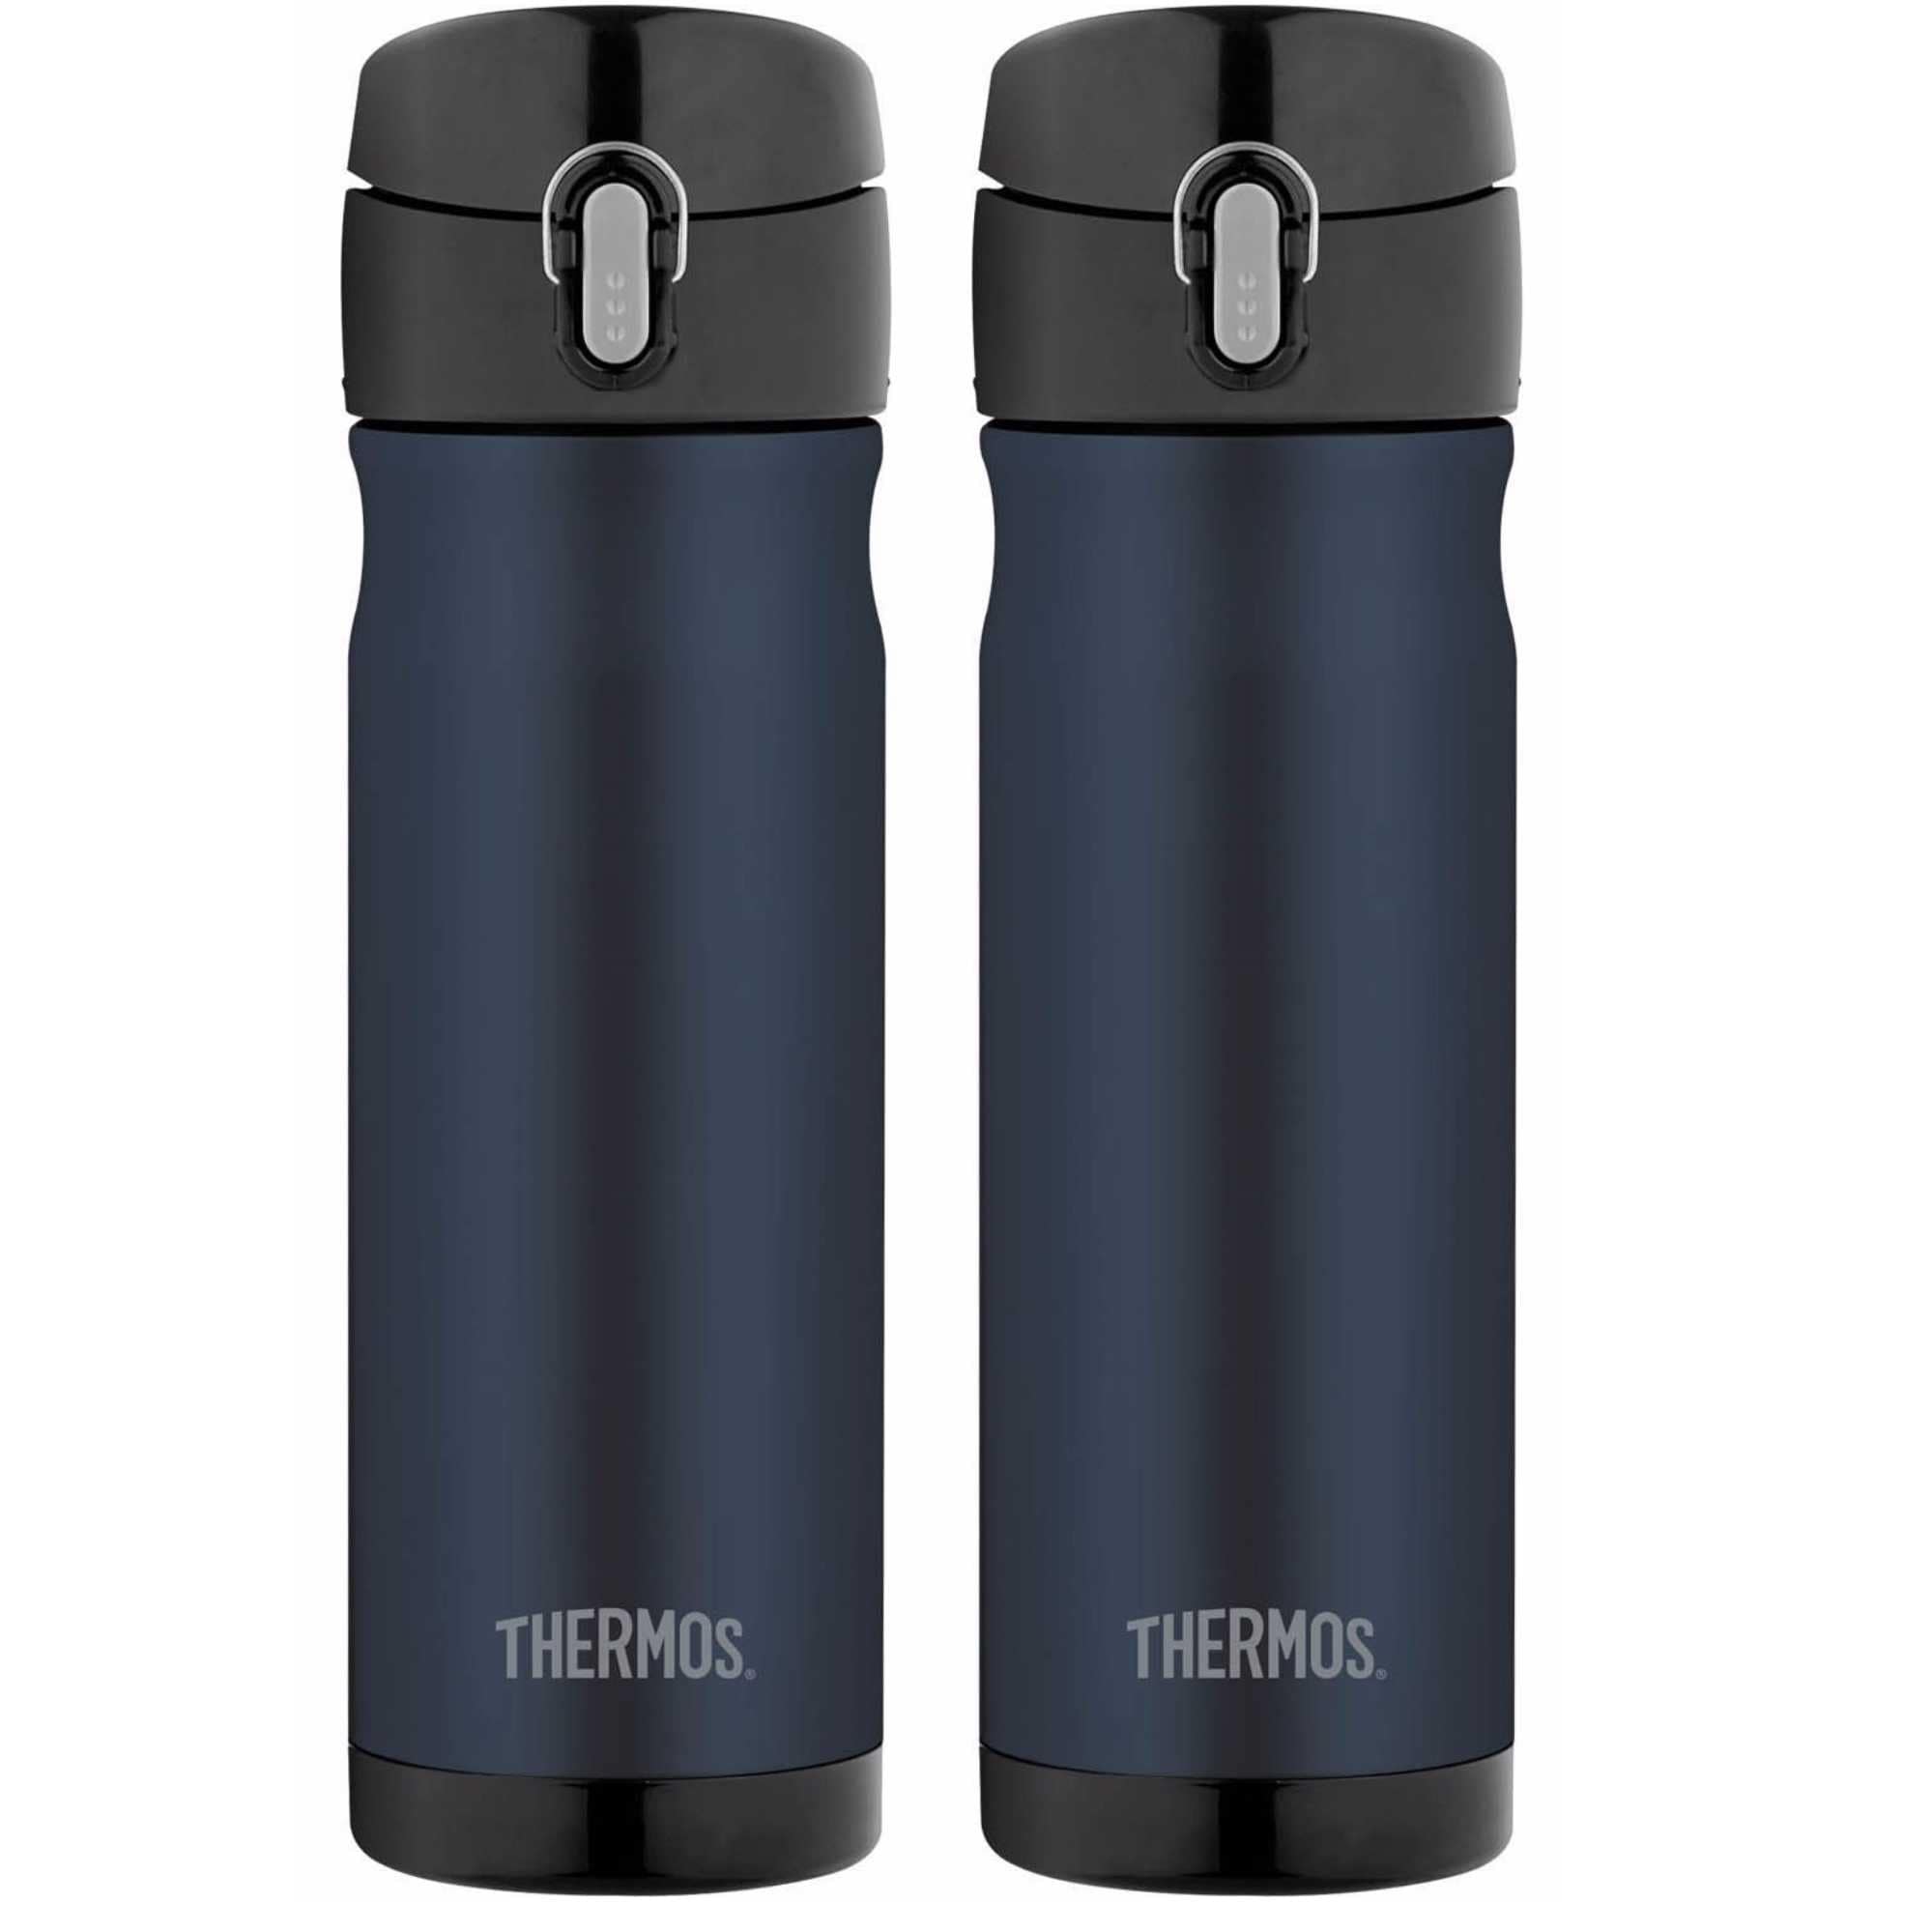 https://ak1.ostkcdn.com/images/products/is/images/direct/b46a2ec9f4f9458e4057b5494784c03b904cc746/Thermos-16-Ounce-Stainless-Steel-Commuter-Bottle%2C-Midnight-Blue-%282-Pack%29.jpg